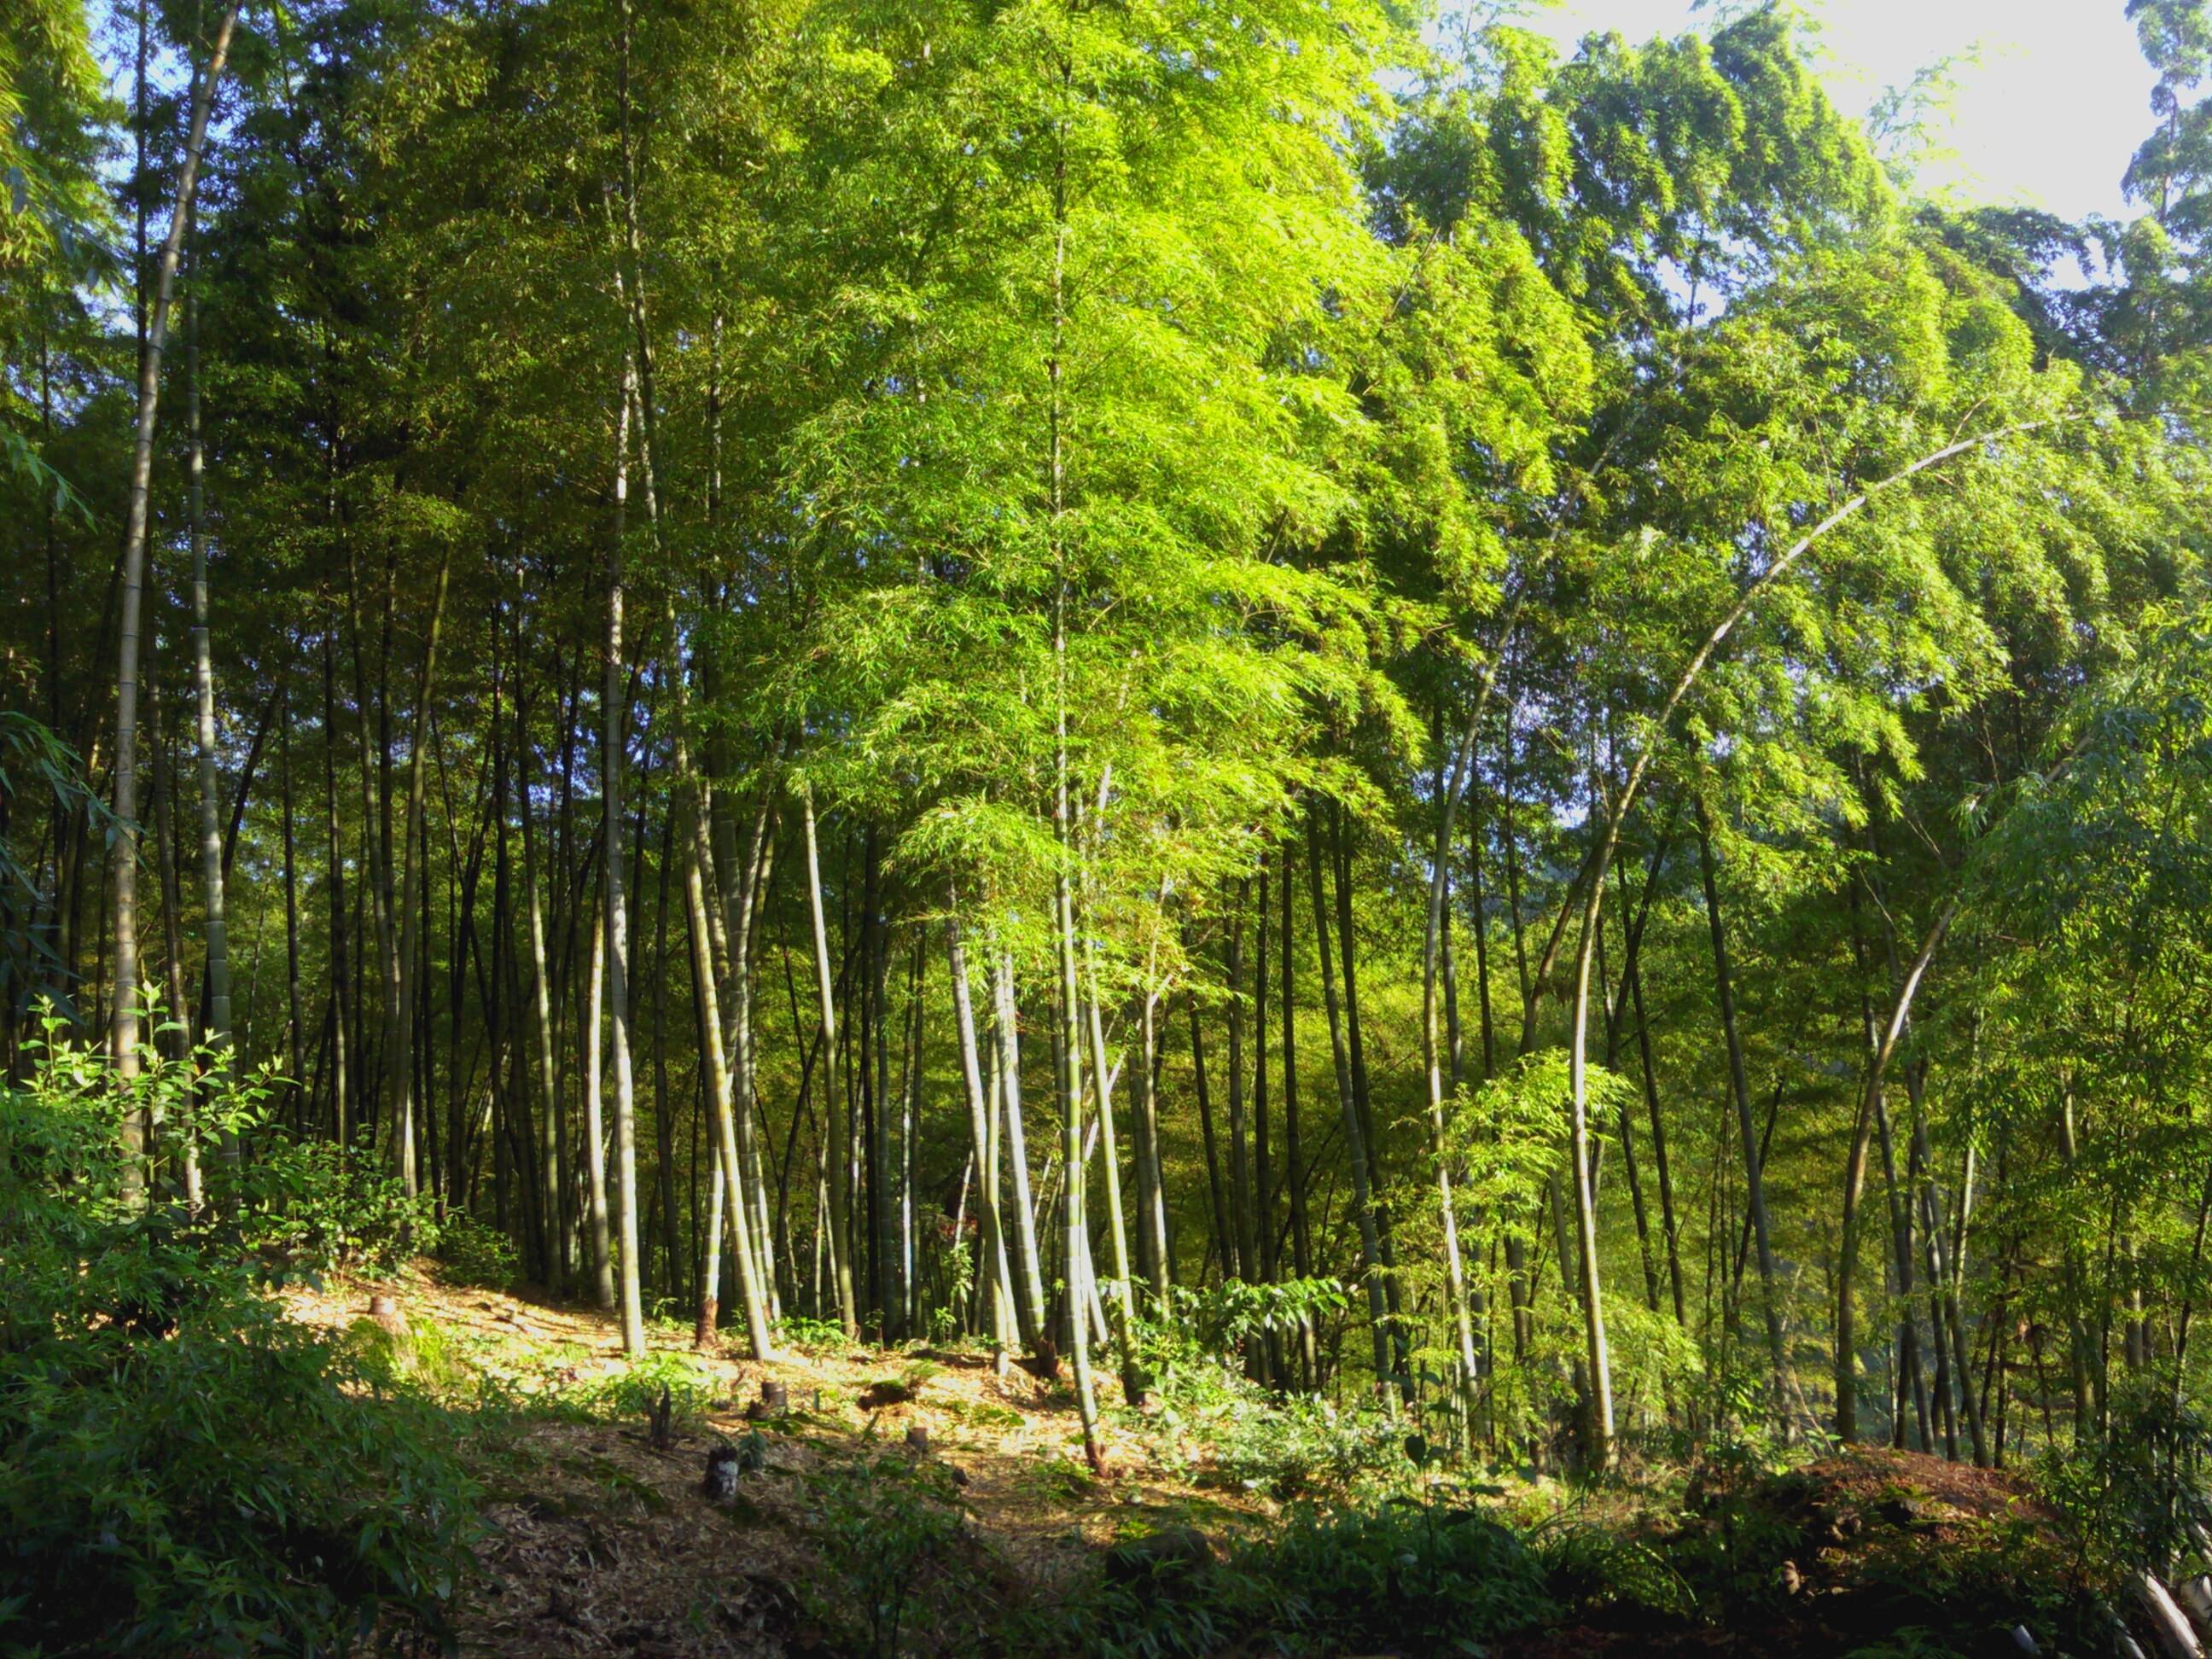 Southern_Sichuan_Bamboo_Forest_2.jpg